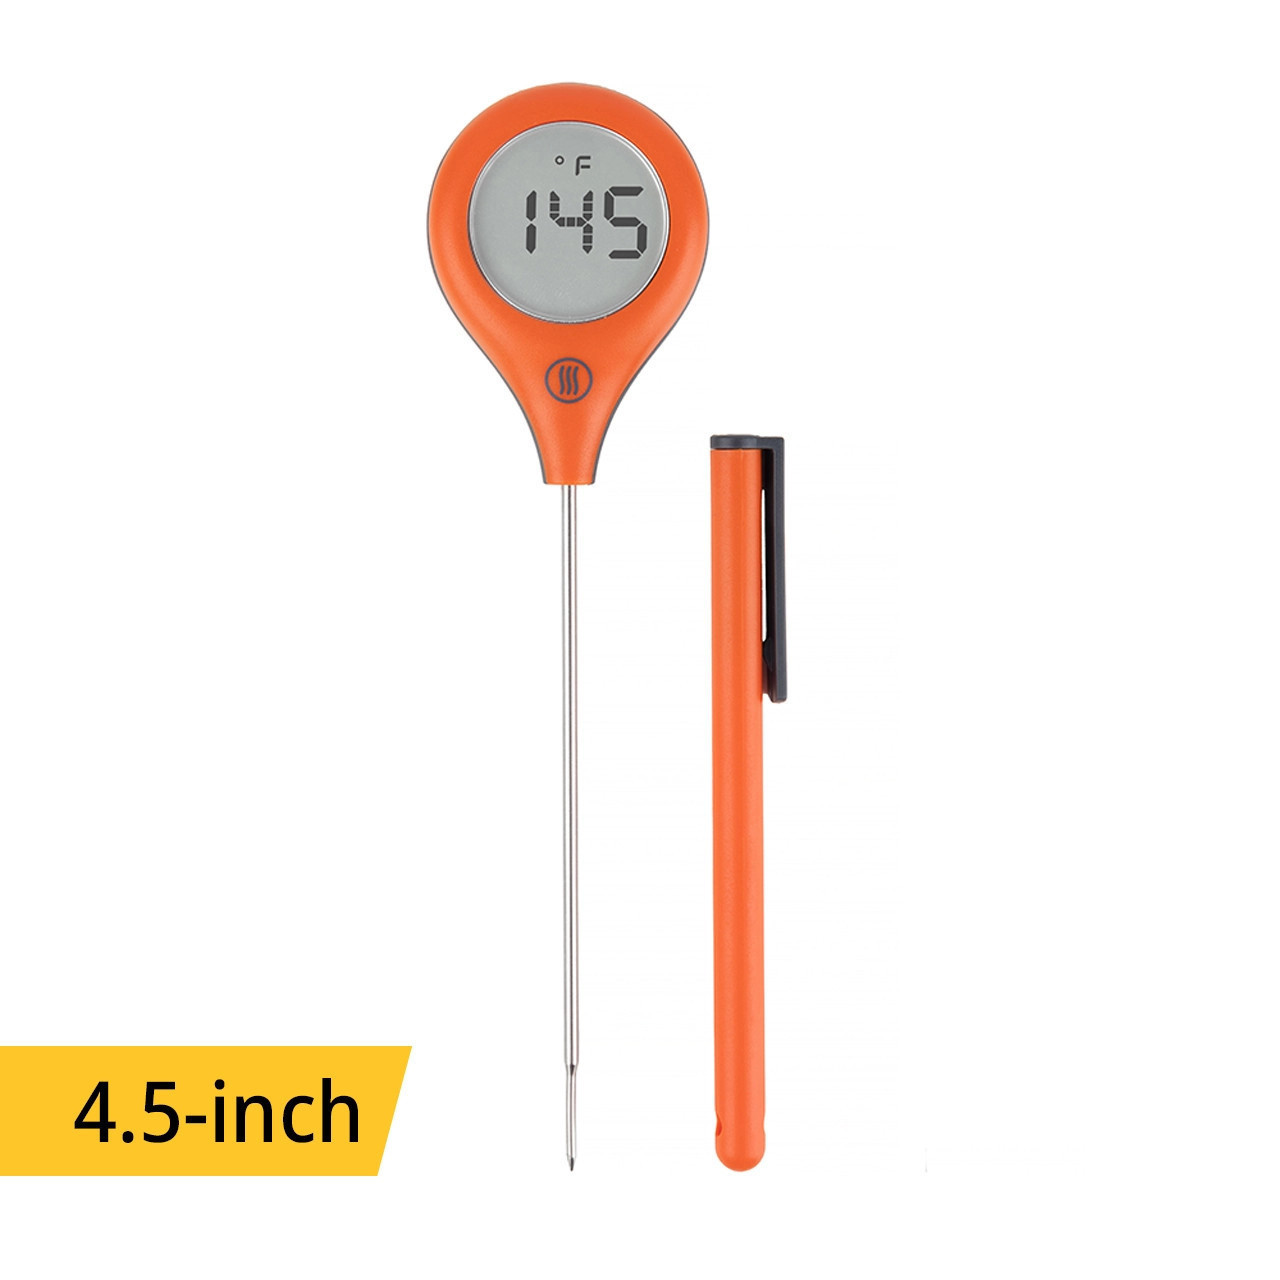 https://cdn11.bigcommerce.com/s-kk2jd0cxqh/images/stencil/1280x1280/products/17304/13796/thermoworks-thermopop-2-orange__49333.1667263621.jpg?c=1